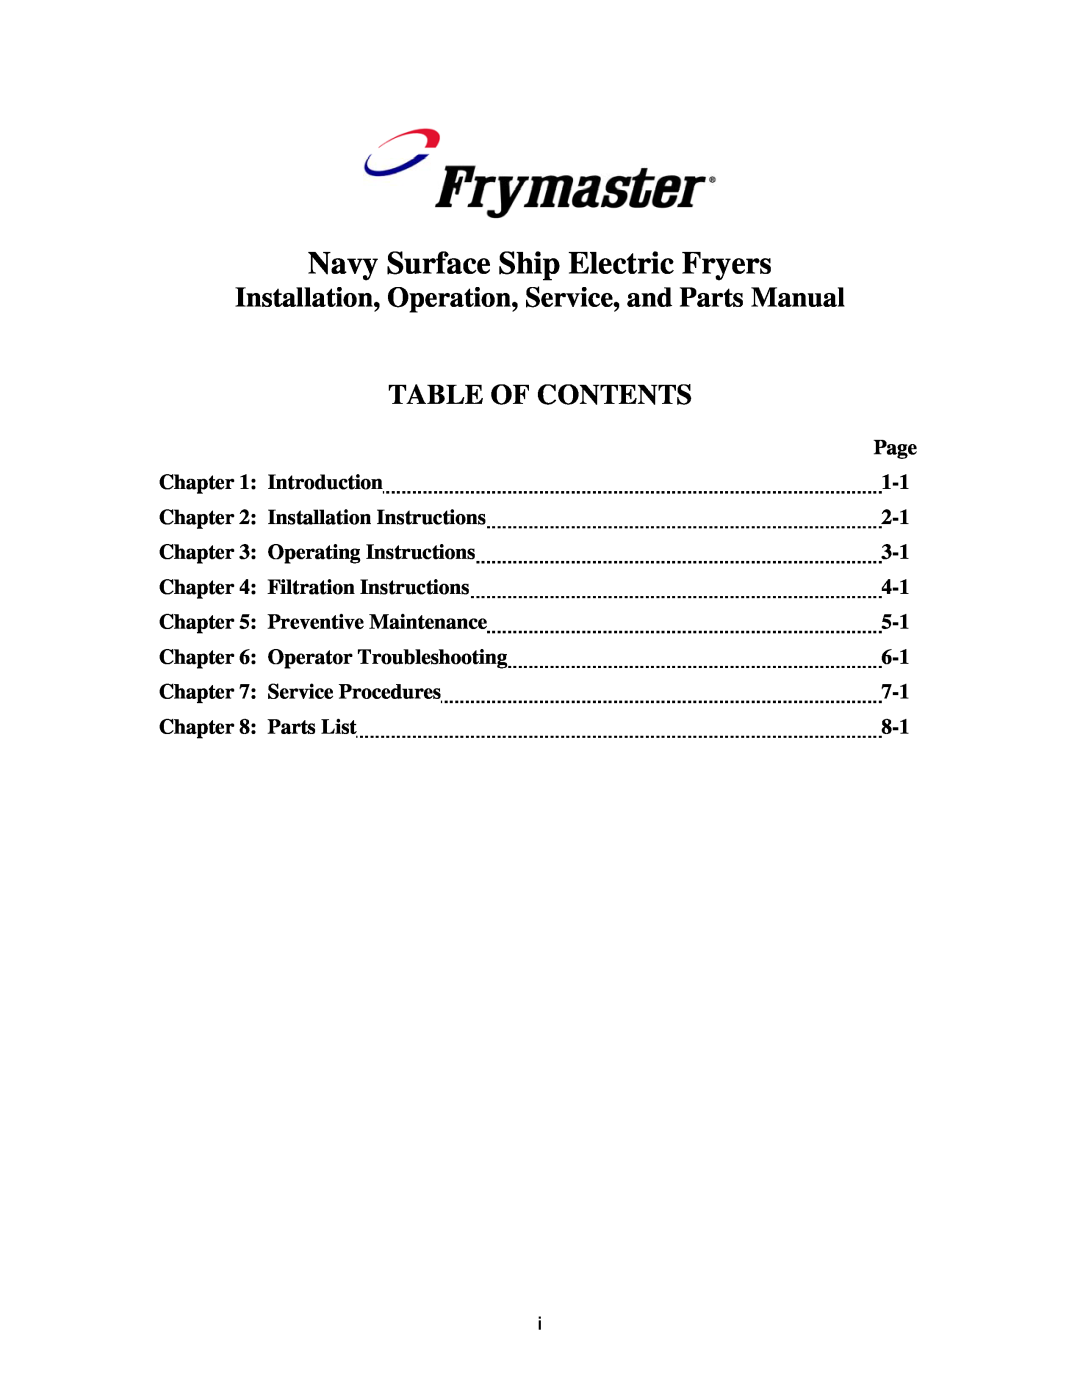 Frymaster H22SC Navy Surface Ship Electric Fryers, Installation, Operation, Service, and Parts Manual TABLE OF CONTENTS 